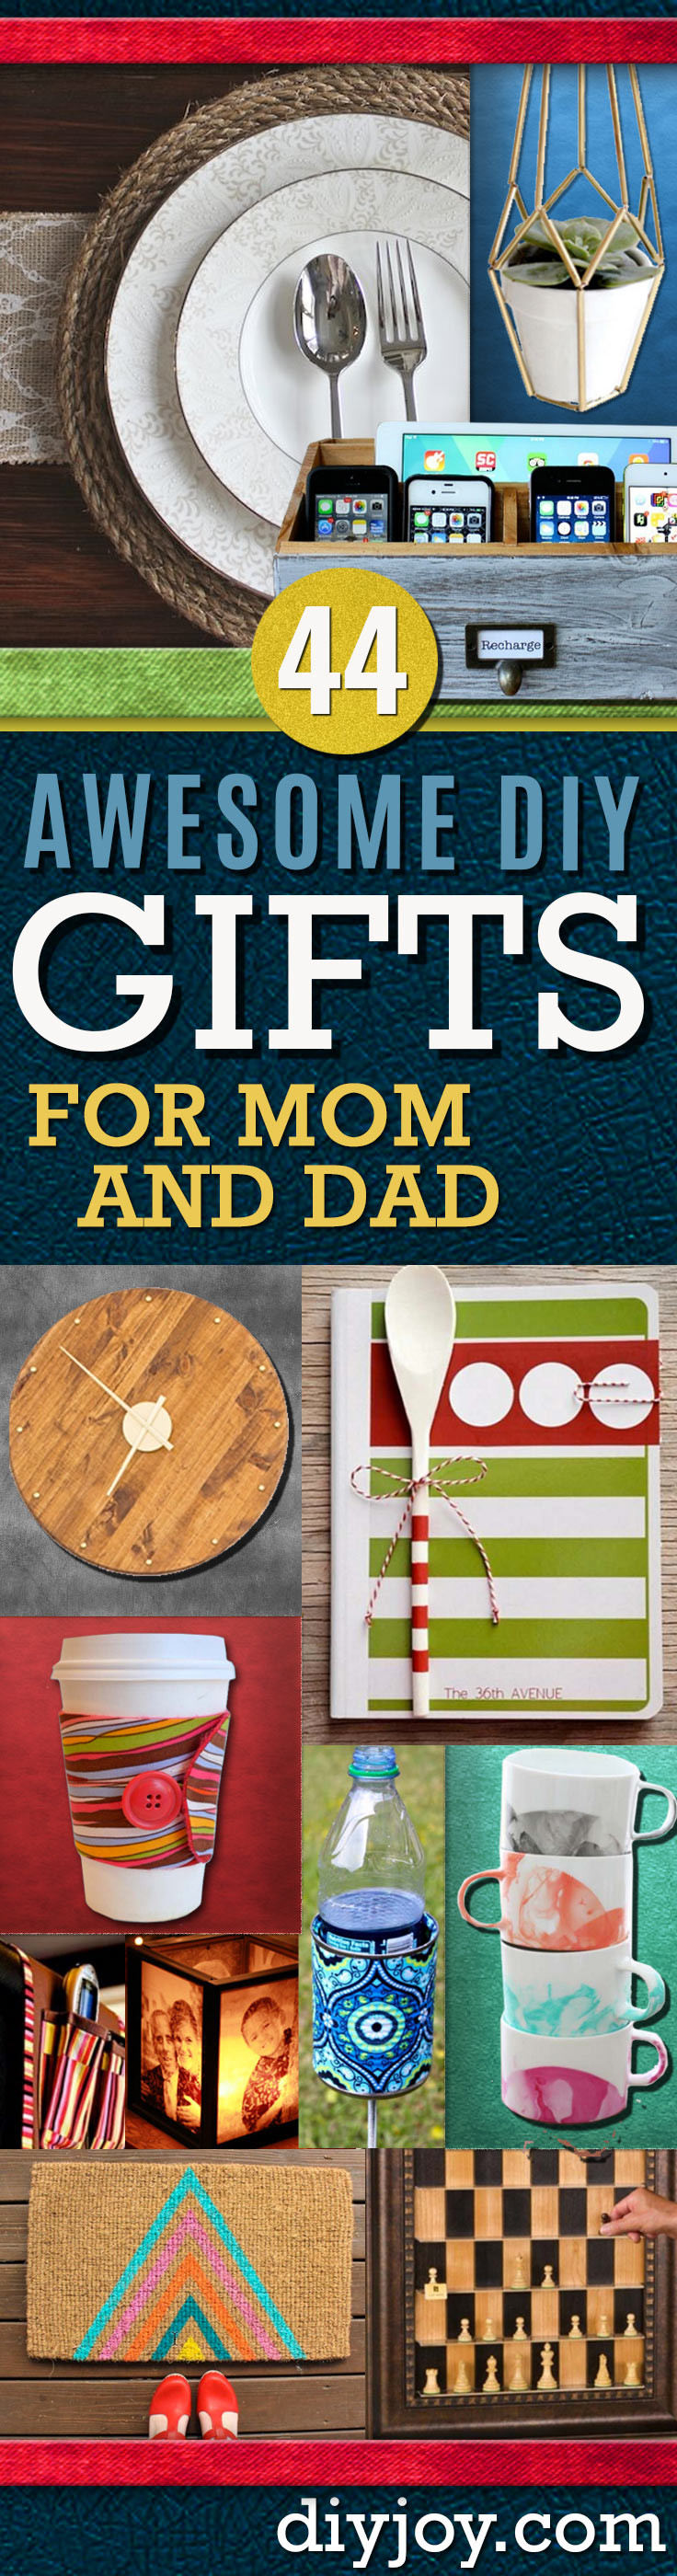 Christmas Gift Ideas For Mom
 Awesome DIY Gift Ideas Mom and Dad Will Love